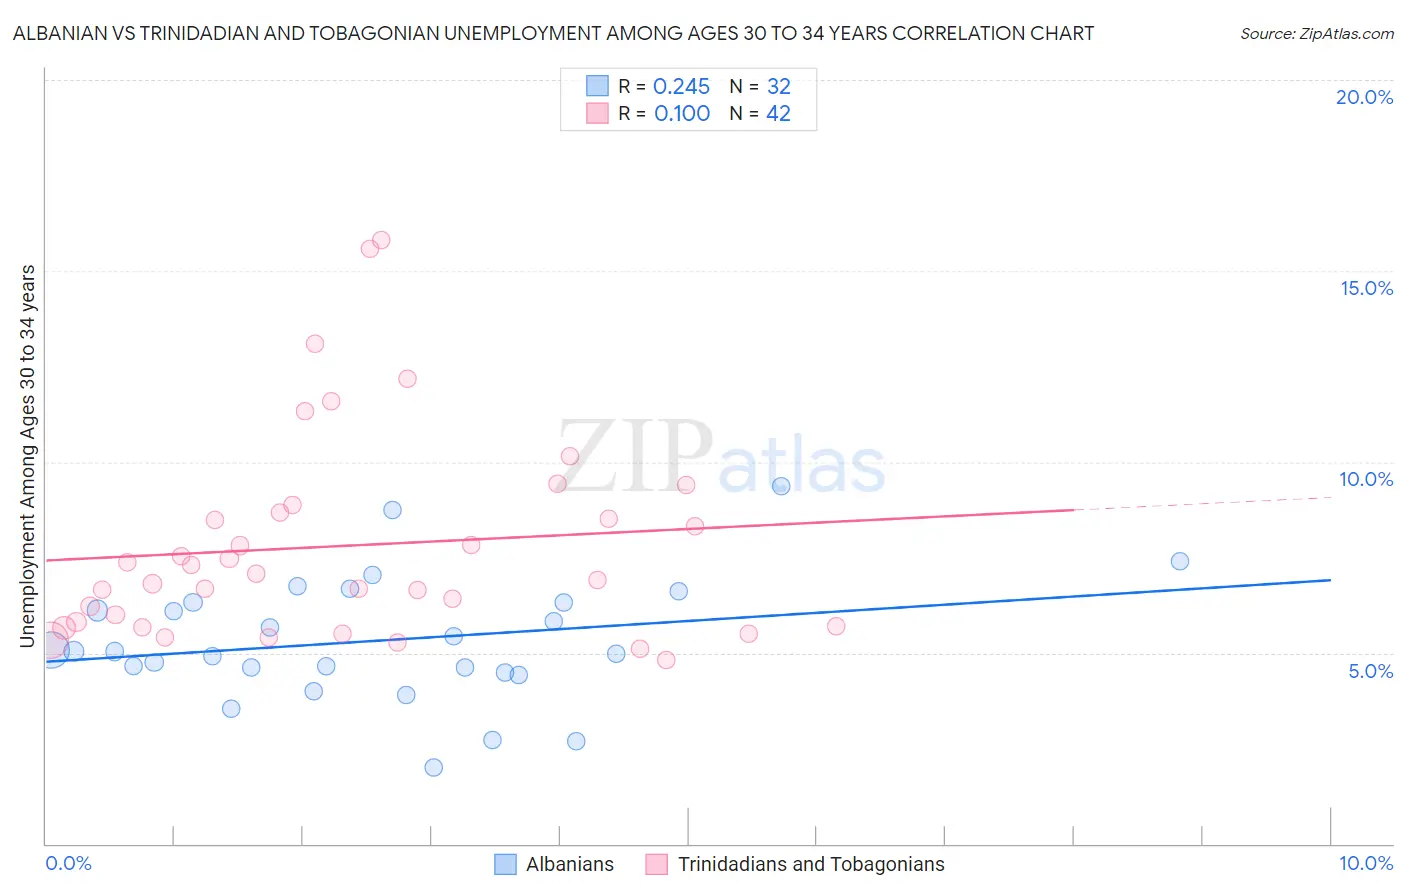 Albanian vs Trinidadian and Tobagonian Unemployment Among Ages 30 to 34 years